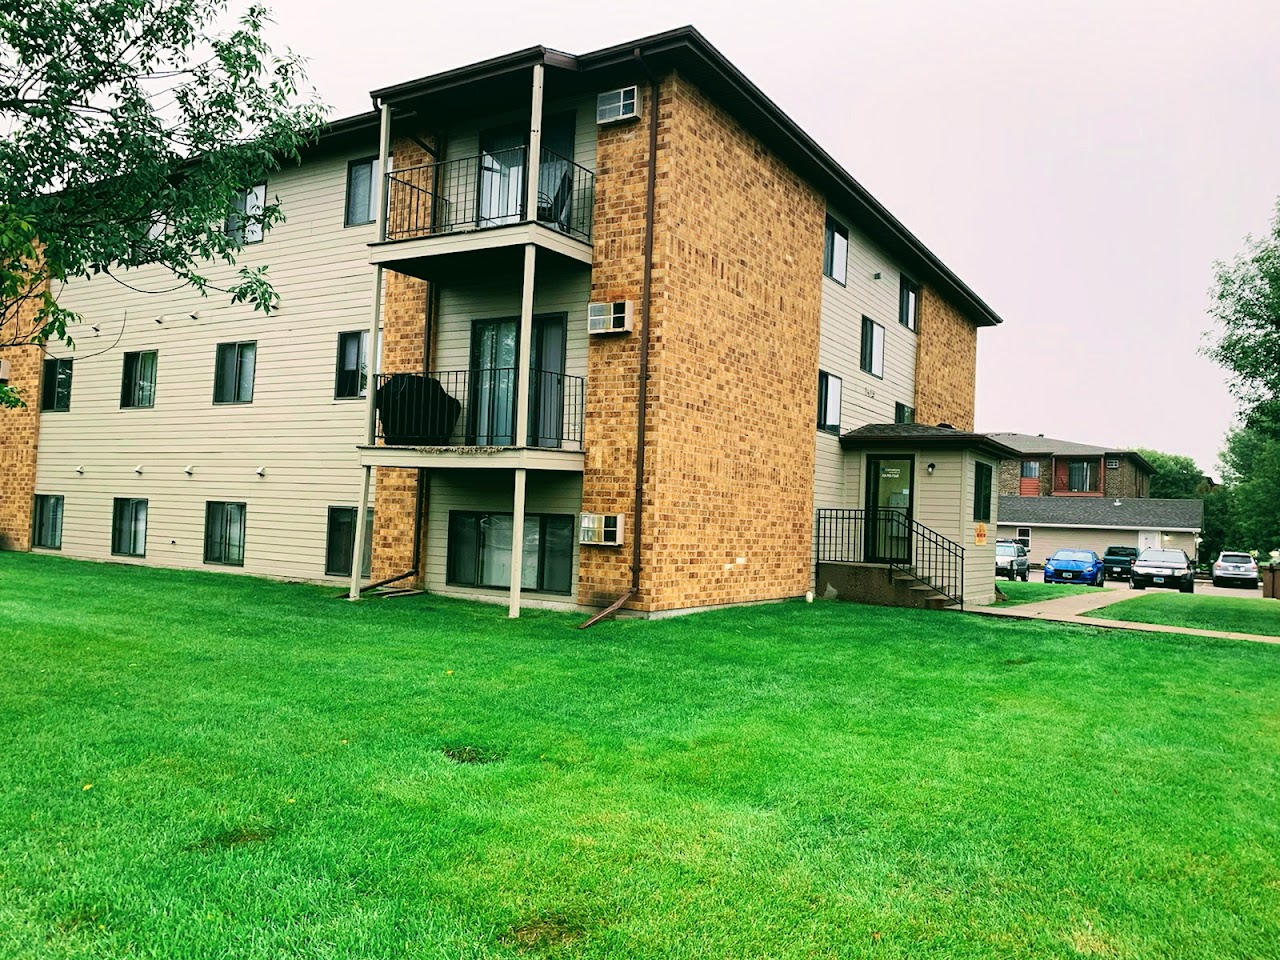 Photo of PRAIRIE WEST APTS VI at 1121 14TH AVE E WEST FARGO, ND 58078